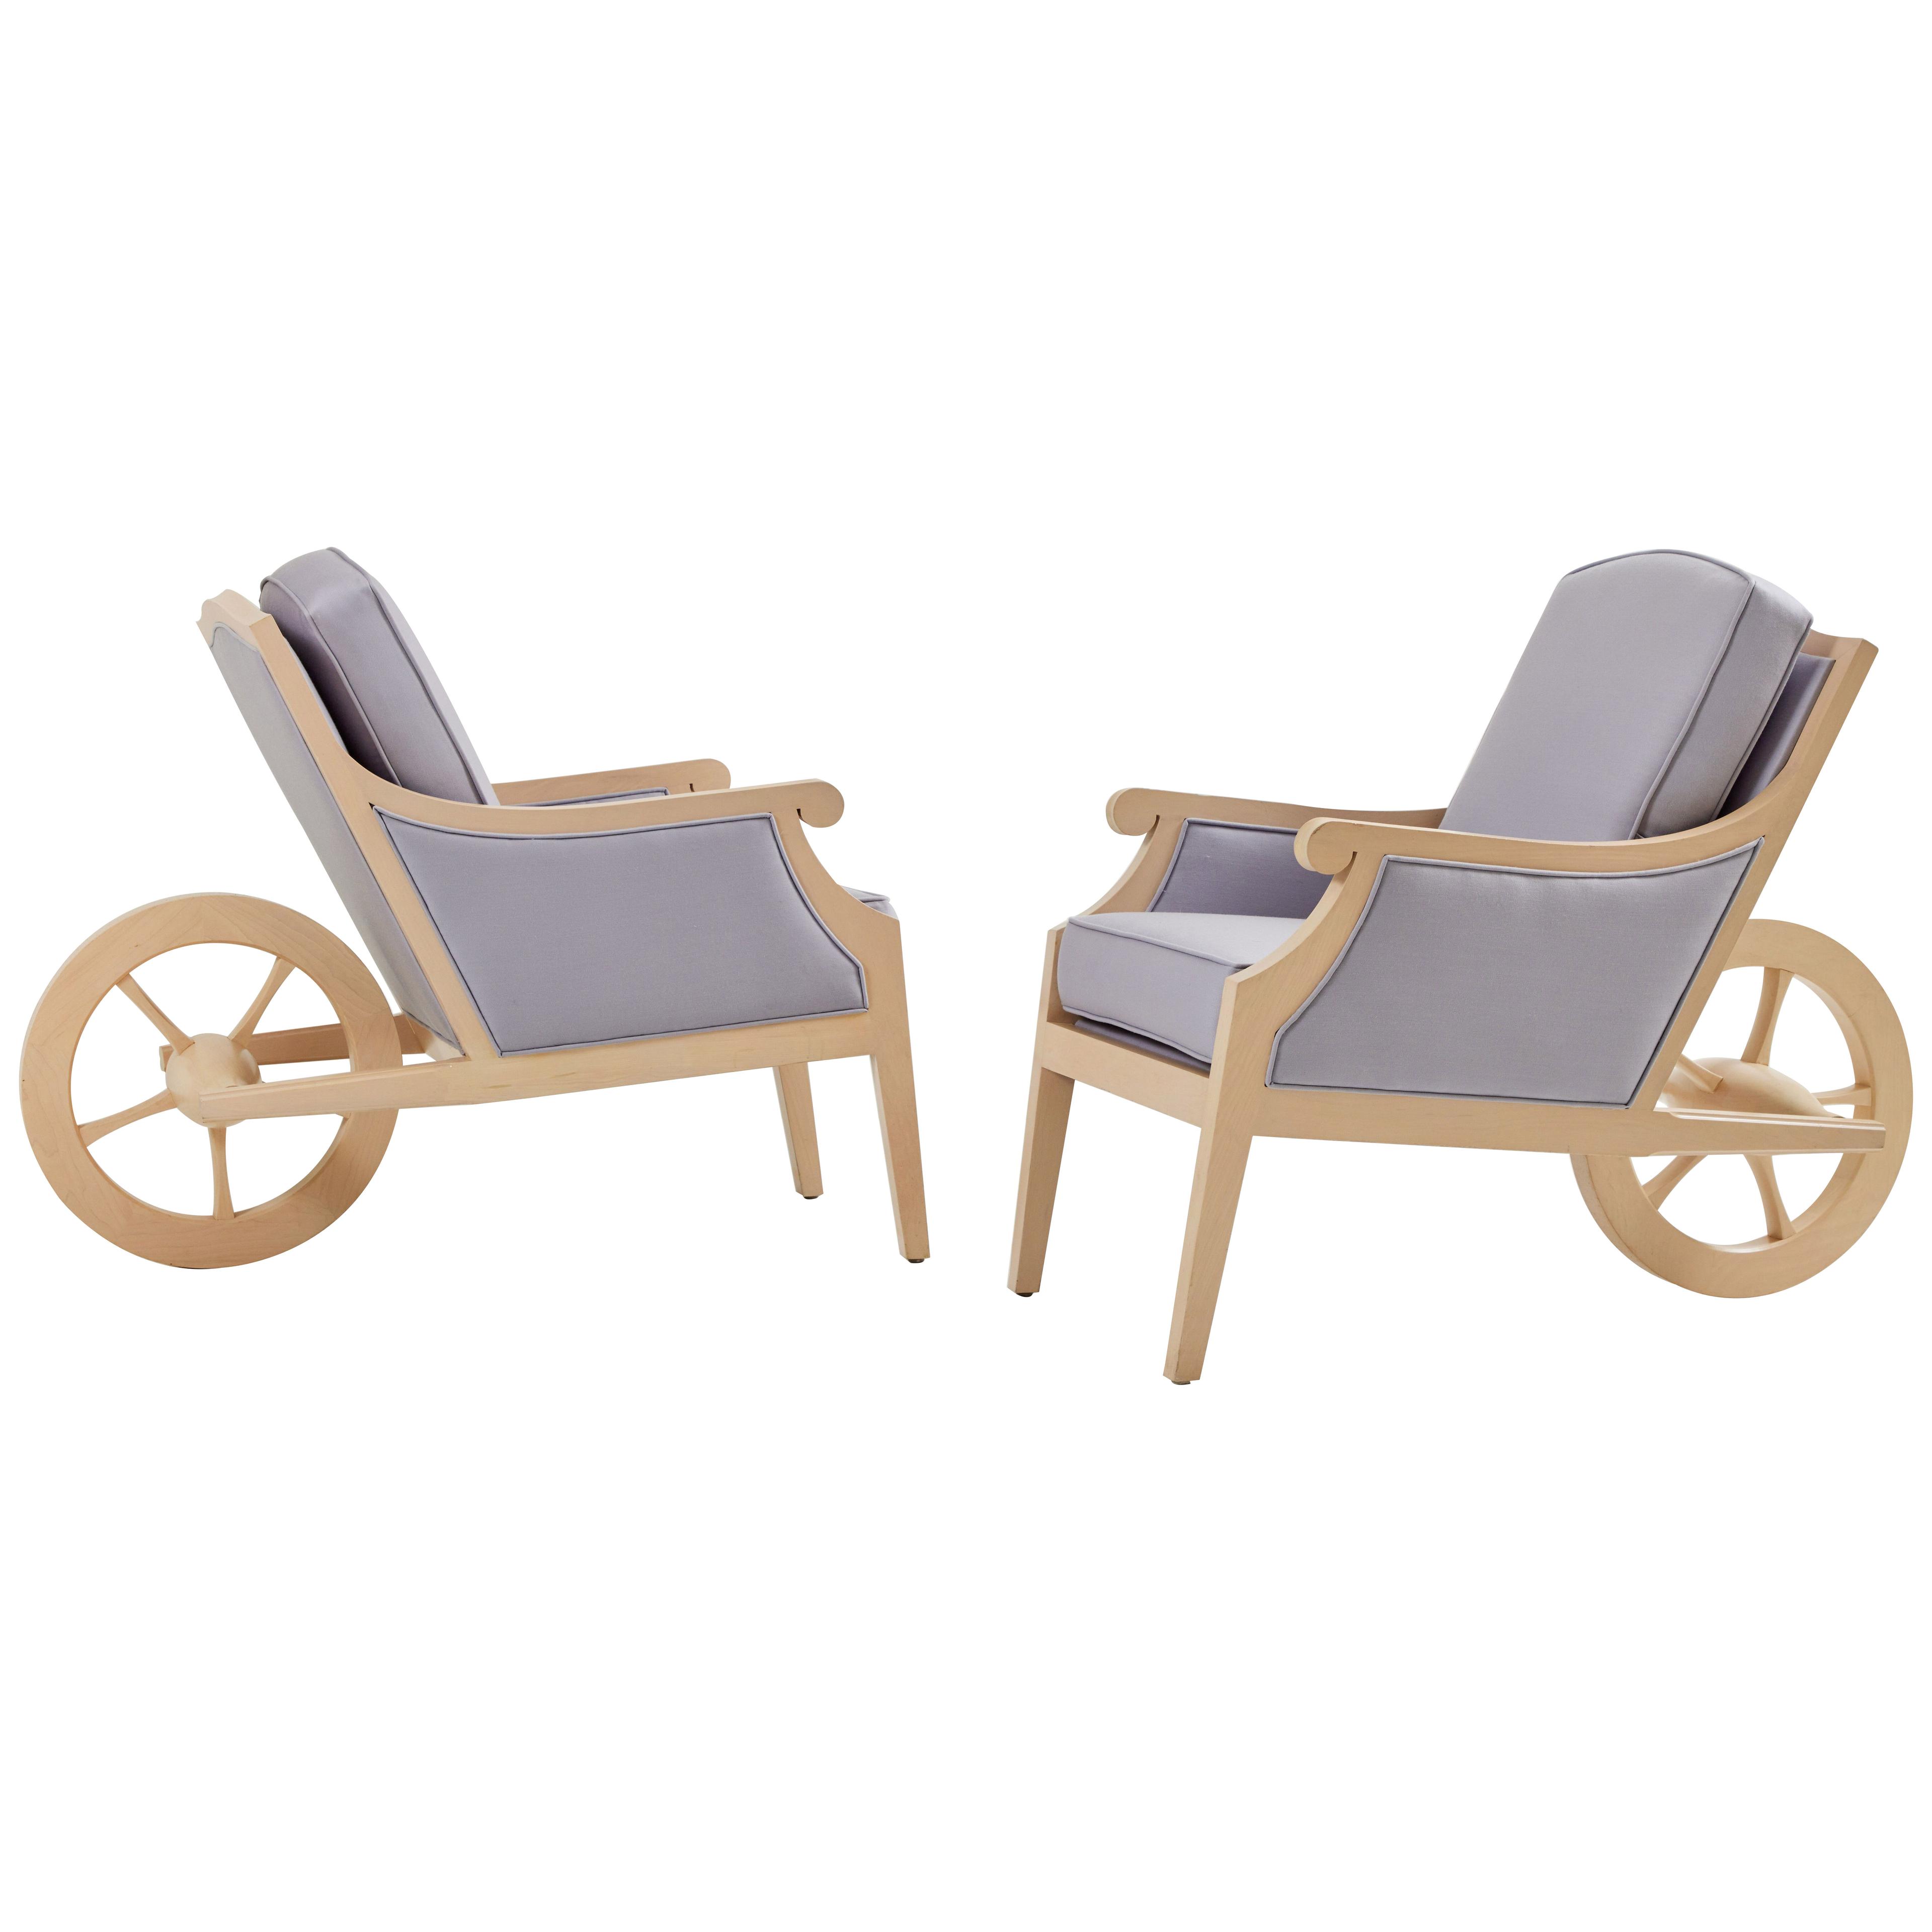 A Pair of "Man Ray" Chairs by Philippe Starck